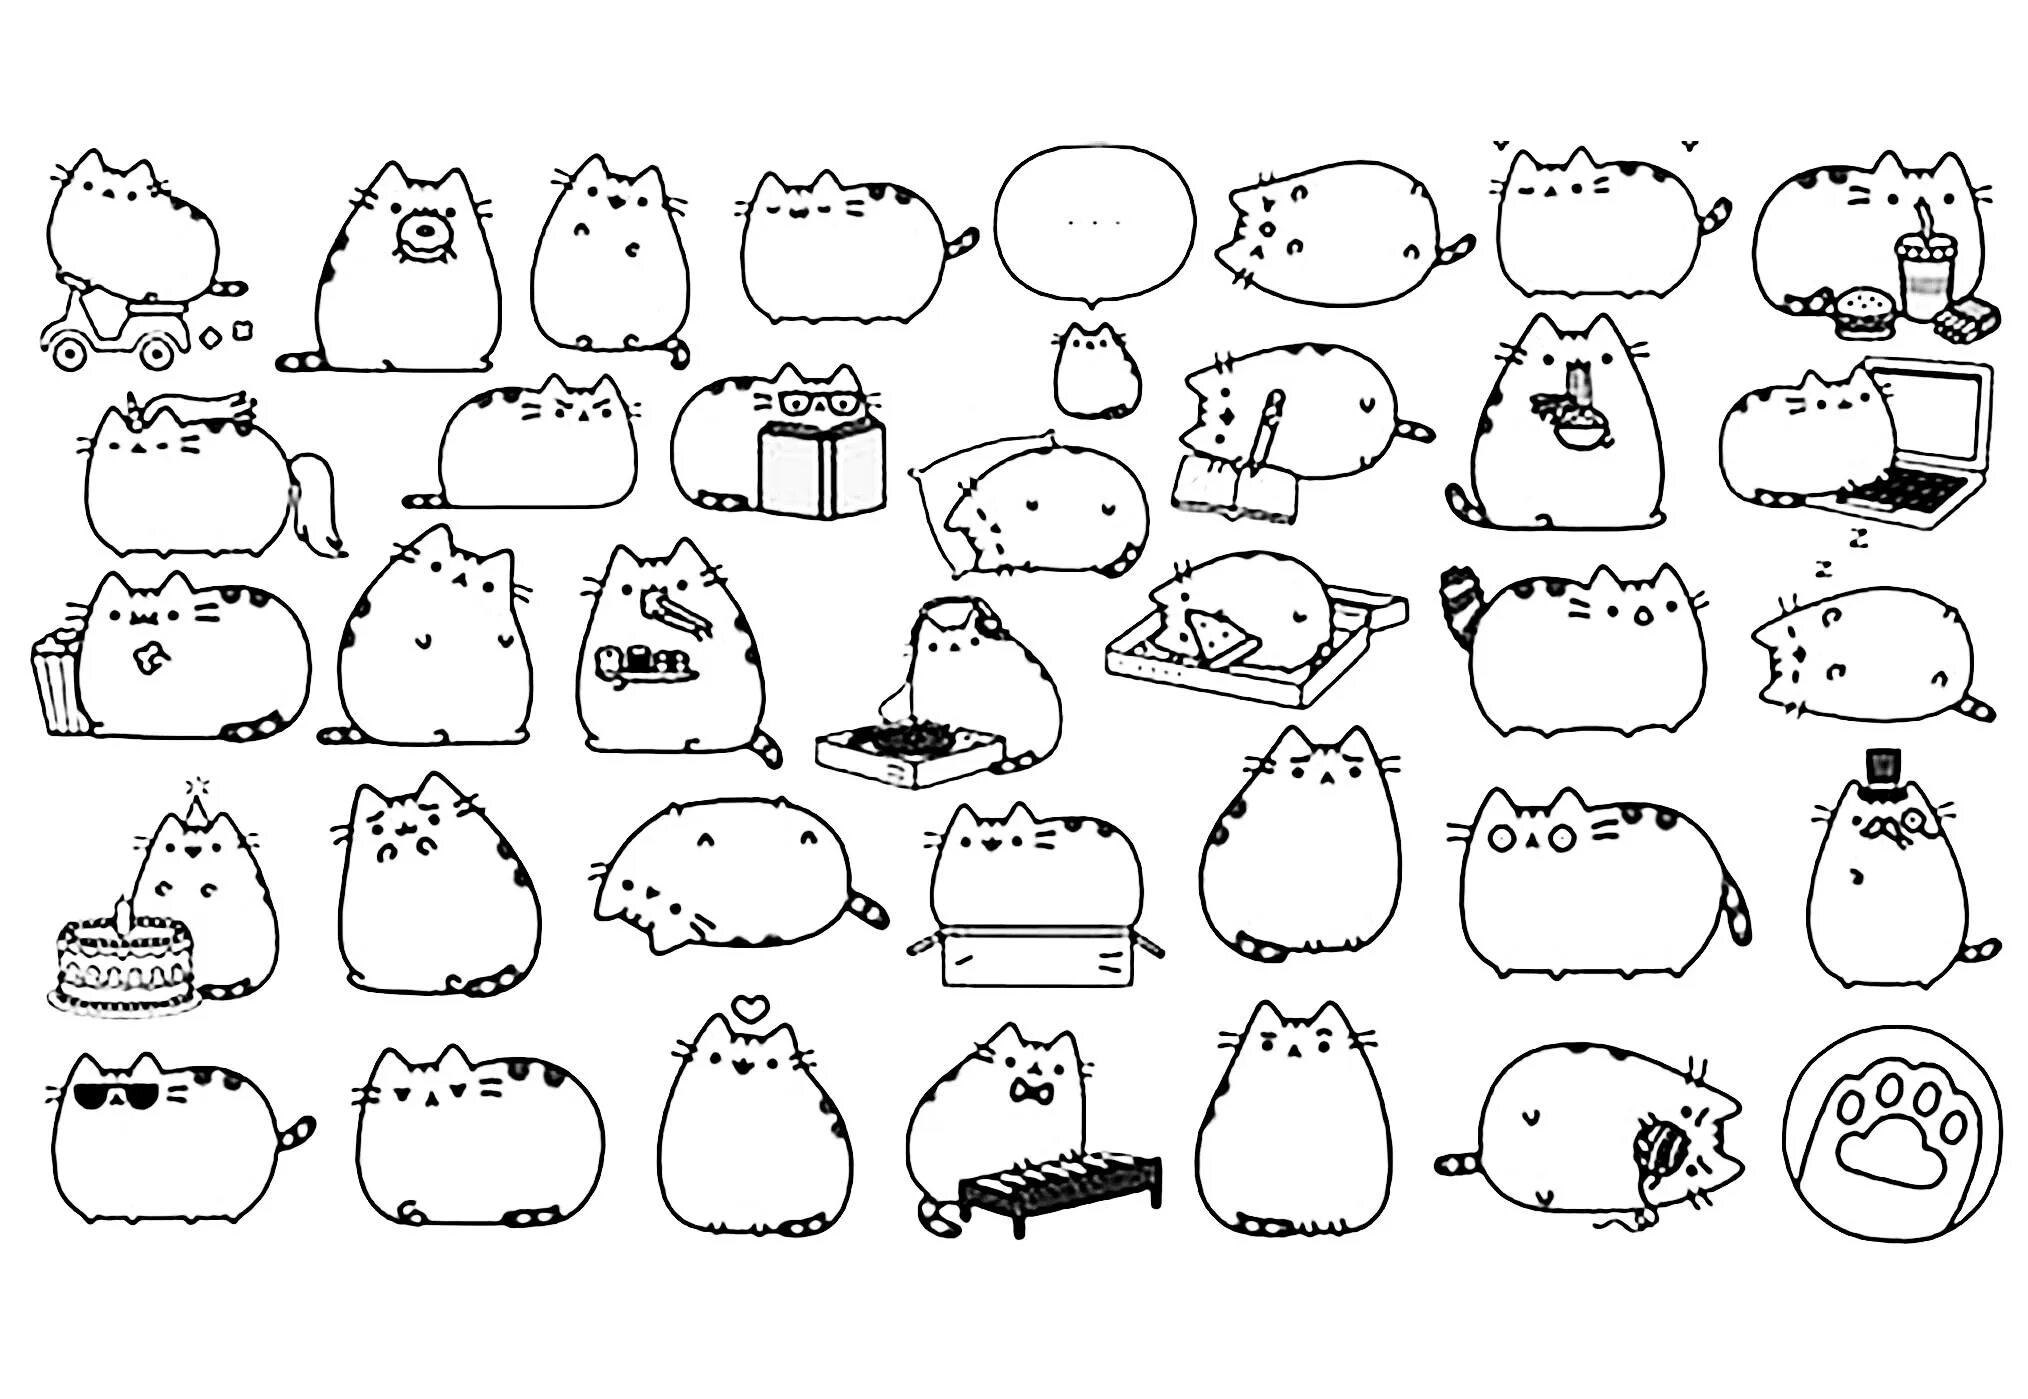 Winsome pusheen sticker coloring page